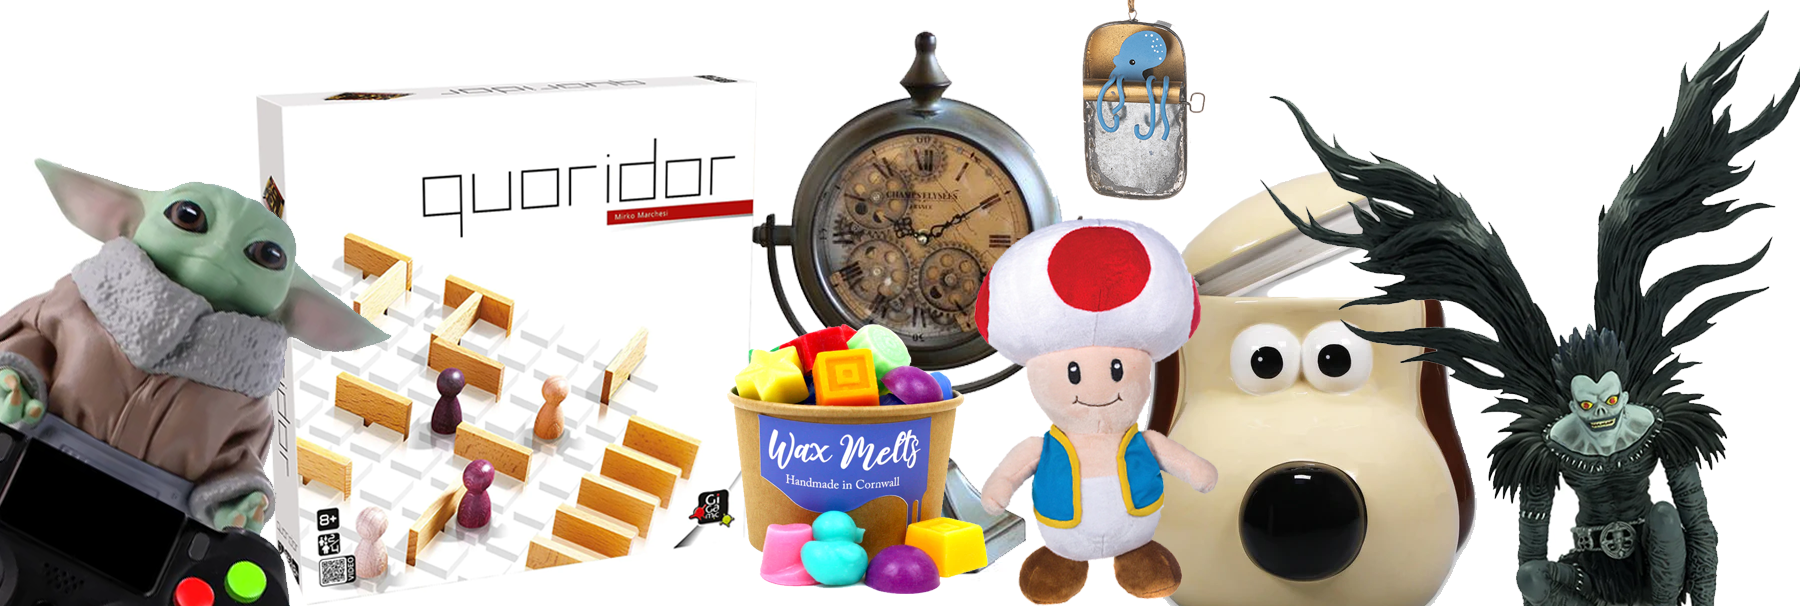 An assortment of items sold at Happy Piranha on a white background including games and geeky décor.